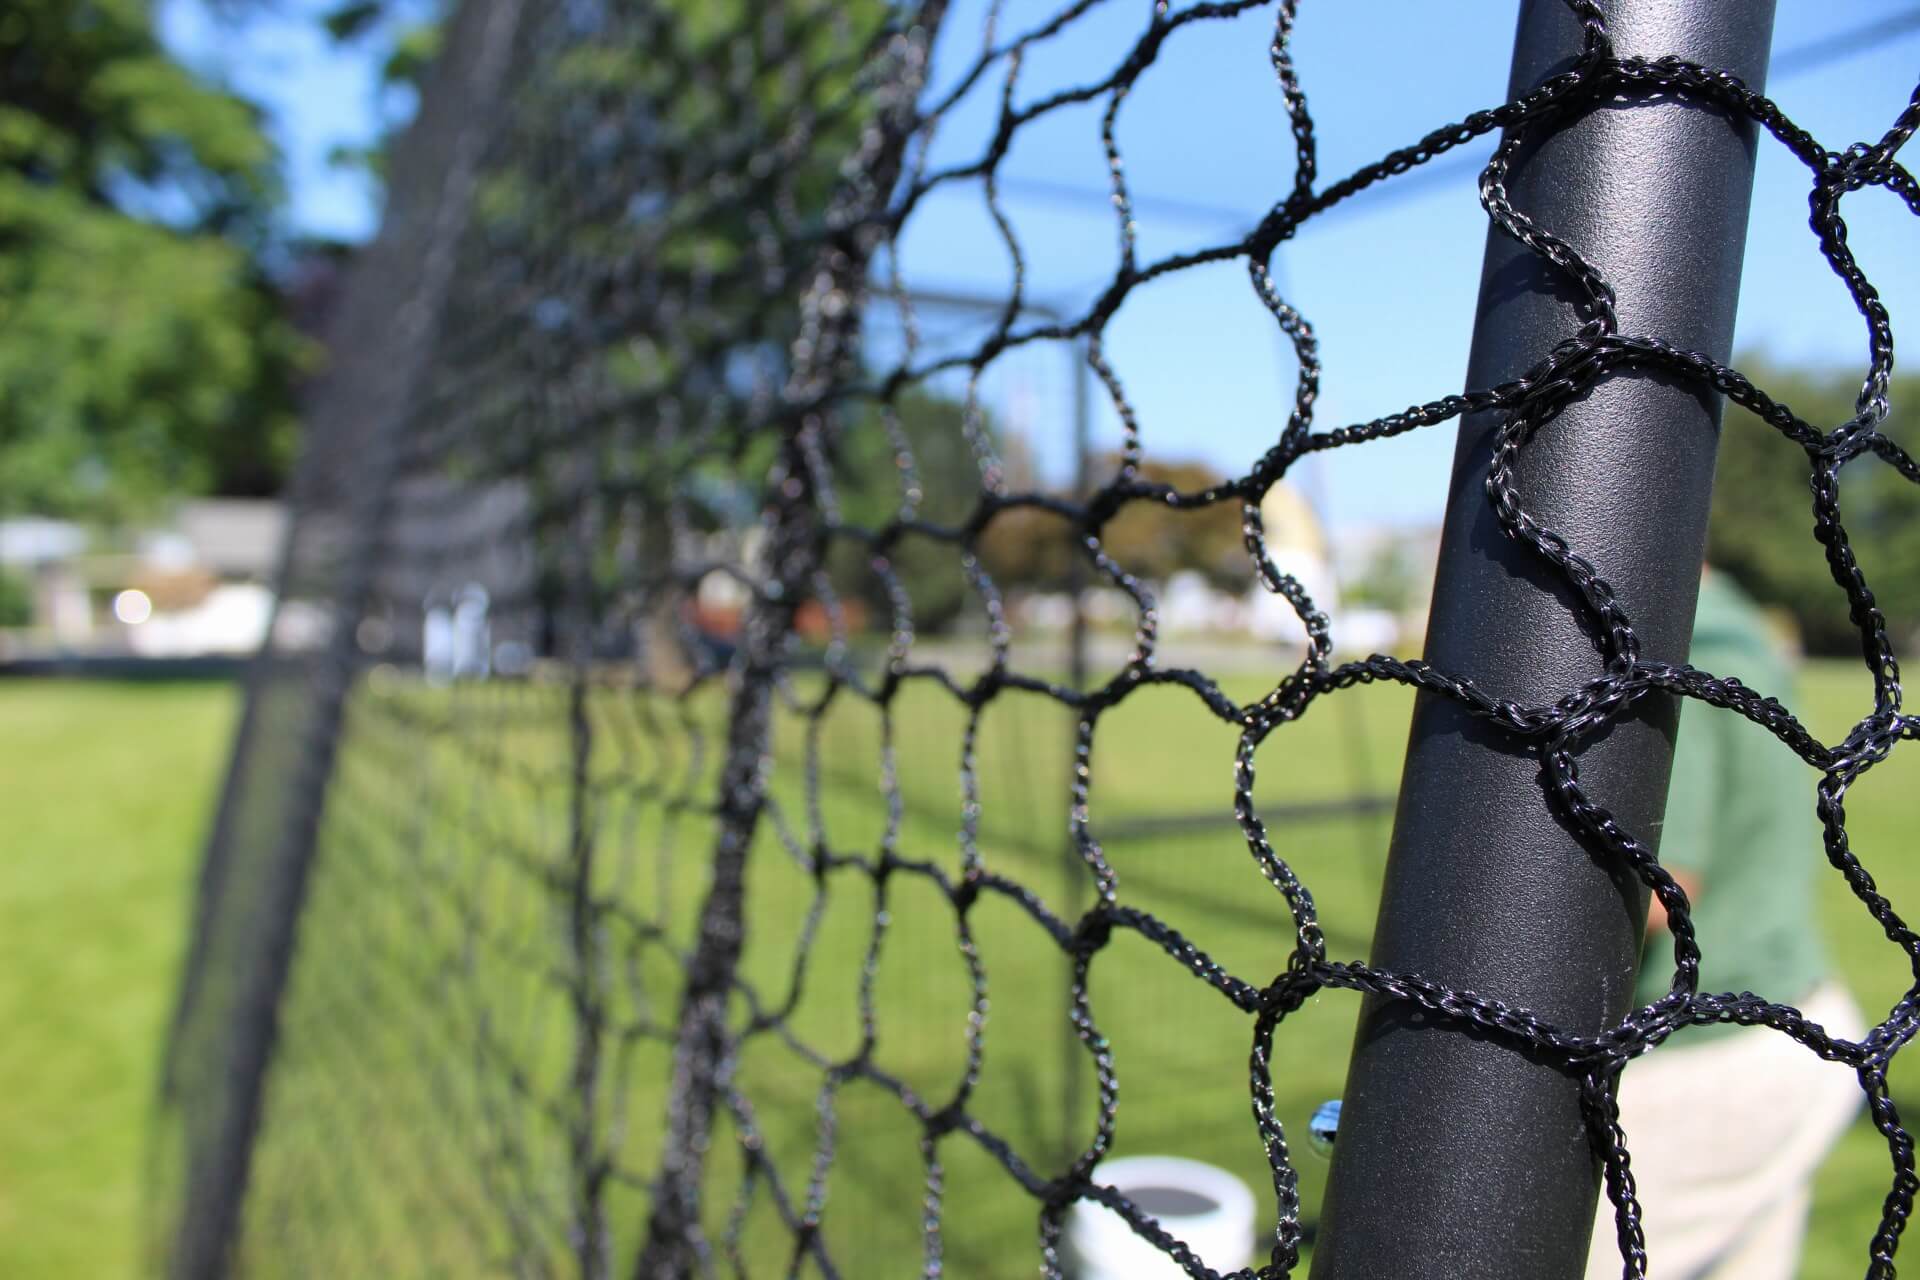 Close up of the trapezoid netting on top of the poles